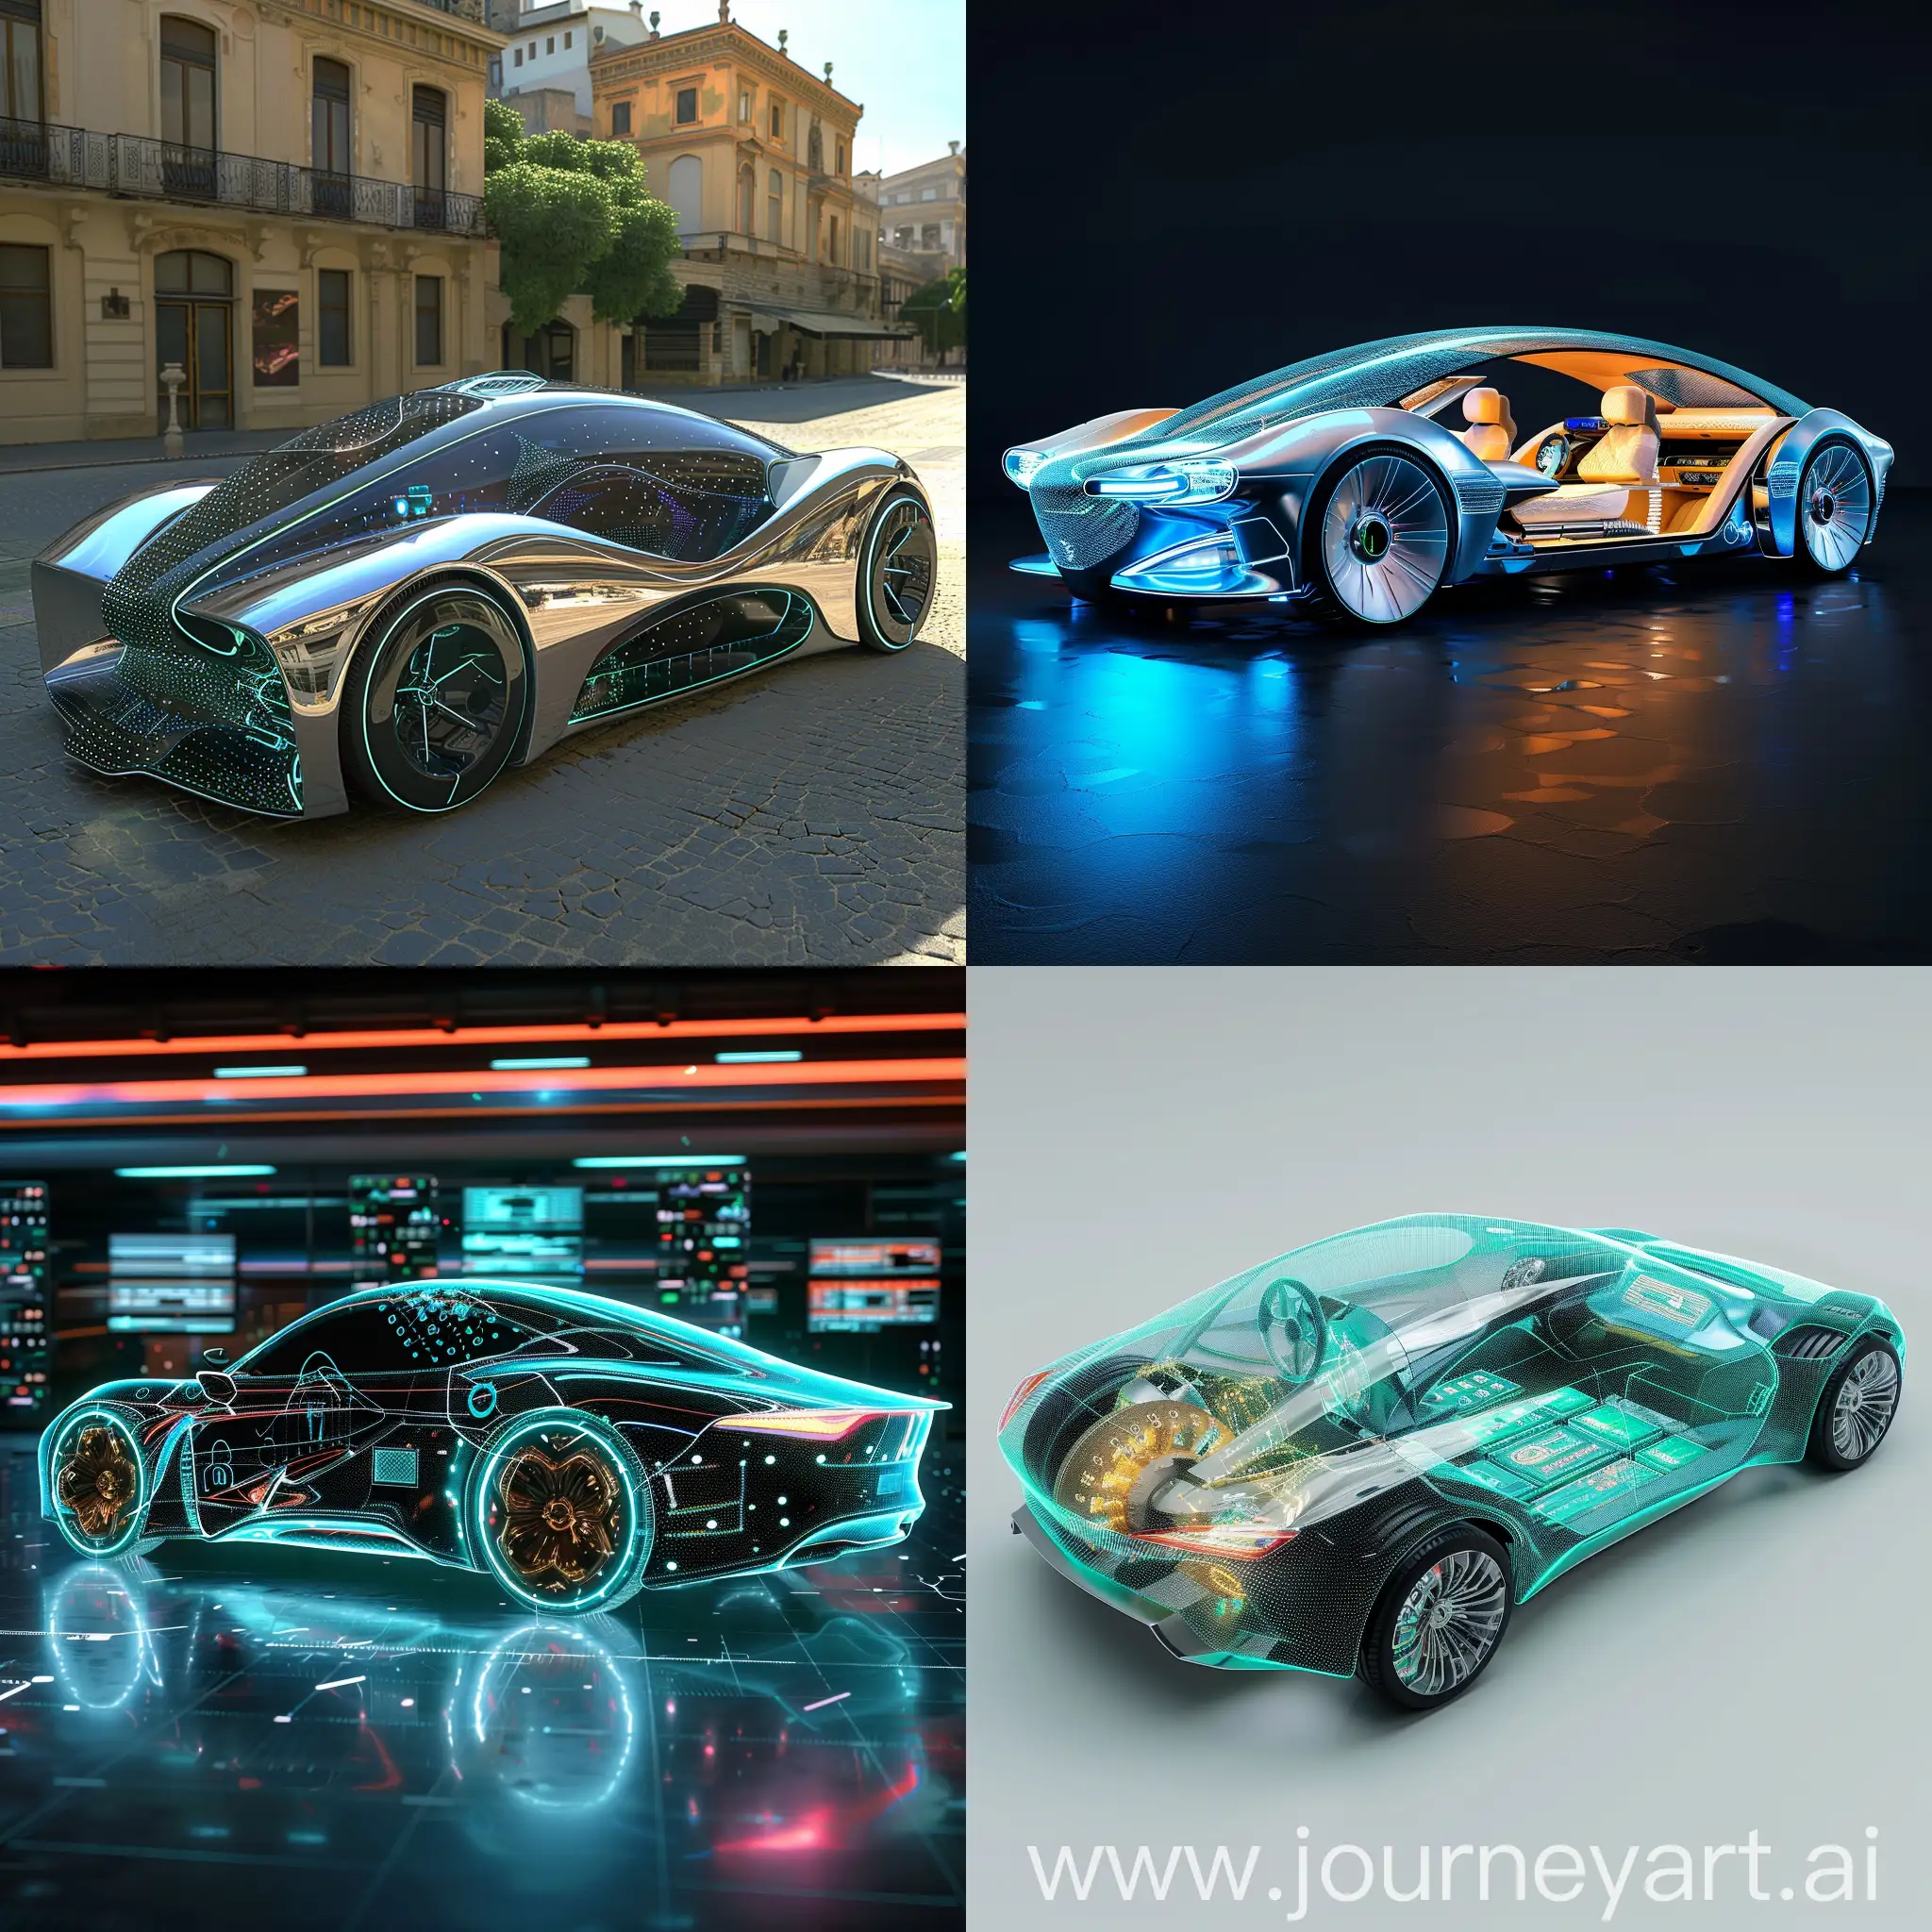 Futuristic car, in futuristic style, Augmented Reality (AR) Windshields, Advanced Driver Assistance Systems (ADAS), Holographic Displays, Biometric Access and Personalization, Smart Surfaces, Modular Interior Configurations, Health Monitoring Systems, Advanced Climate Control, Intelligent Voice Assistants, Wireless Charging and Connectivity, Adaptive Aerodynamics, Solar Panel Integration, Electroluminescent Paint and LED Lighting, 360-Degree Cameras and Sensors, Self-Healing Materials, Transparent Roofs and Body Panels, Electric and Wireless Charging Ports, Digital Side Mirrors, Active Suspension Systems, Interactive and Adaptive Exteriors, Graphene-Based Components, Carbon Fiber Reinforced Polymers (CFRP), Self-Healing Nanomaterials, Bio-Based and Recycled Materials, Shape-Memory Alloys (SMAs), Liquid Crystal Polymers (LCP), Metal Foam Sandwich Structures, Transparent Aluminum, Photovoltaic Fabrics, Shapeable and Programmable Materials, Carbon Nanotube Body Panels, Shape-Memory Polymers (SMP), Electrochromic Glass Windows, Self-Cleaning Nano Coatings, Bioluminescent Paint, Graphene-Infused Tires, Thermoelectric Energy Harvesting Panels, Nanostructured Titanium Alloys, Piezoelectric Windshields, Magnetic Levitation (Maglev) Panels, unreal engine 5 --stylize 1000